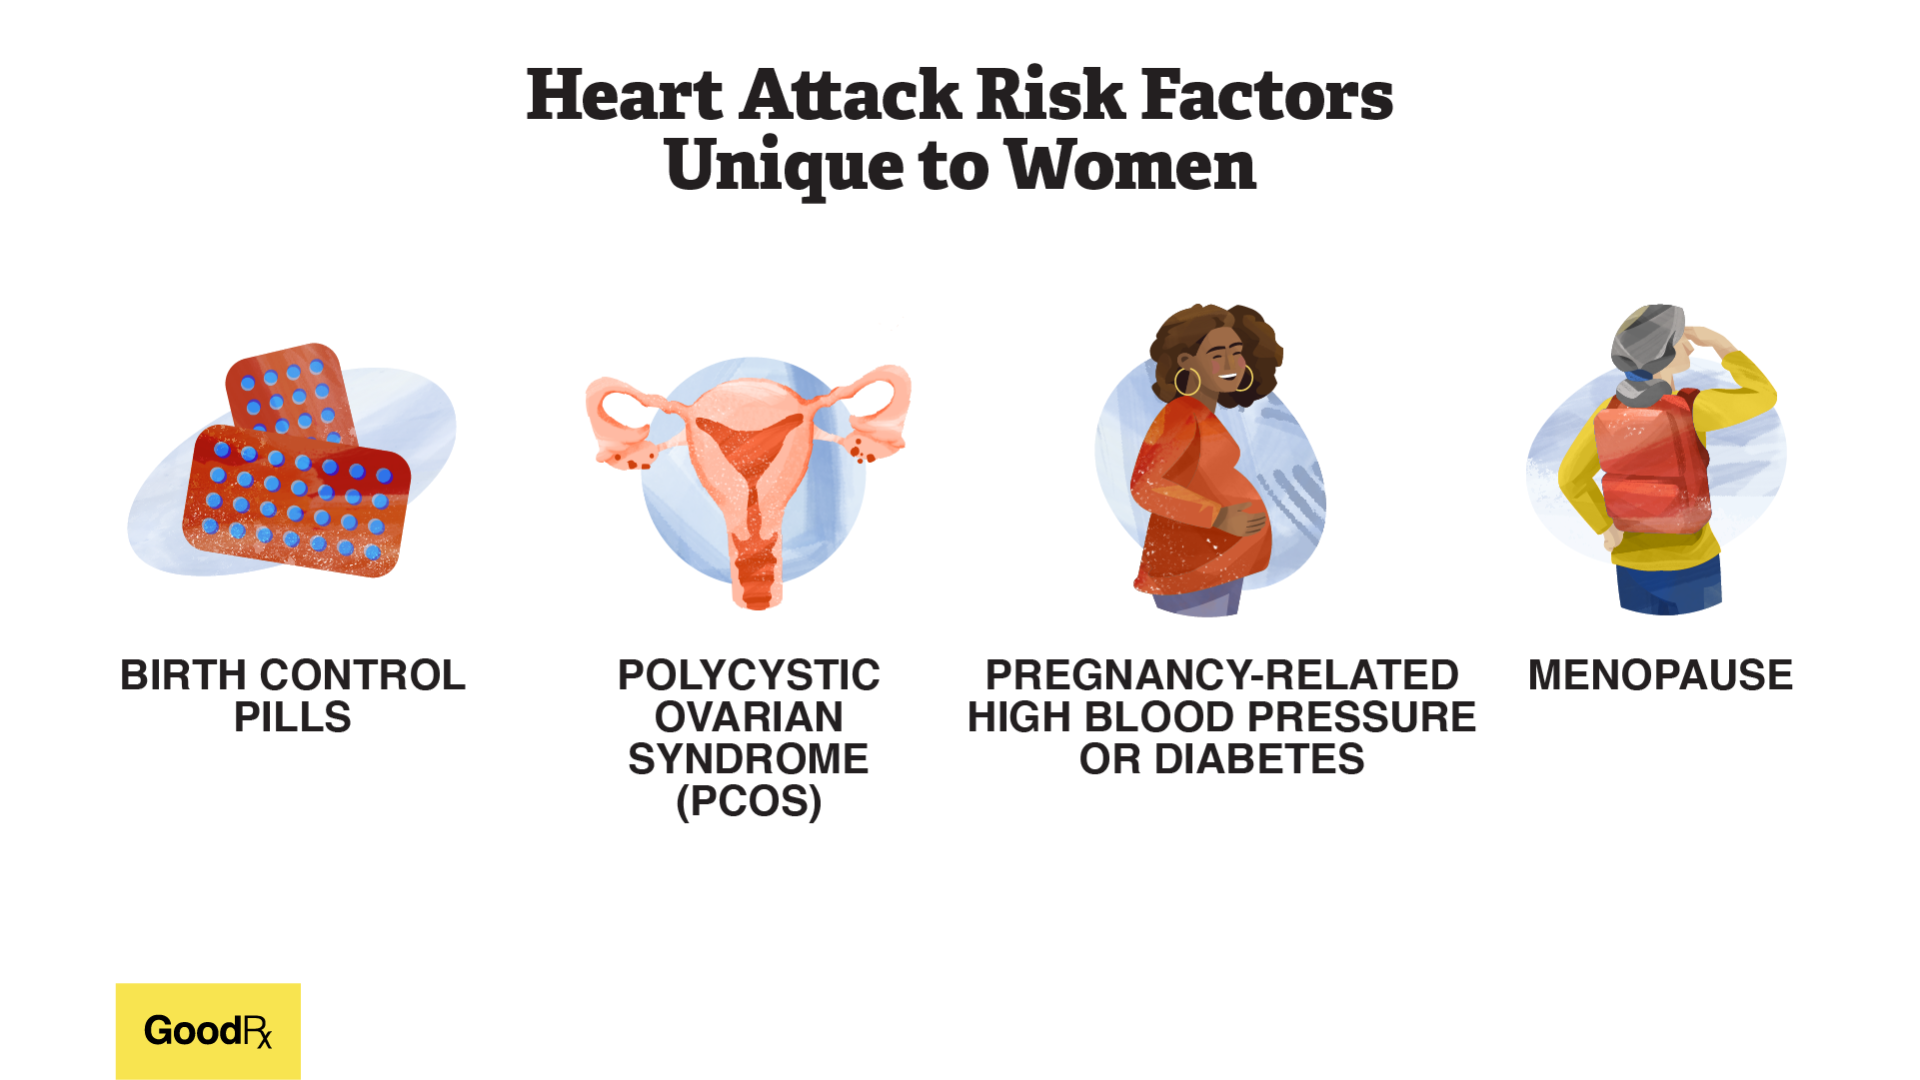 Heart Attack - Causes and Risk Factors